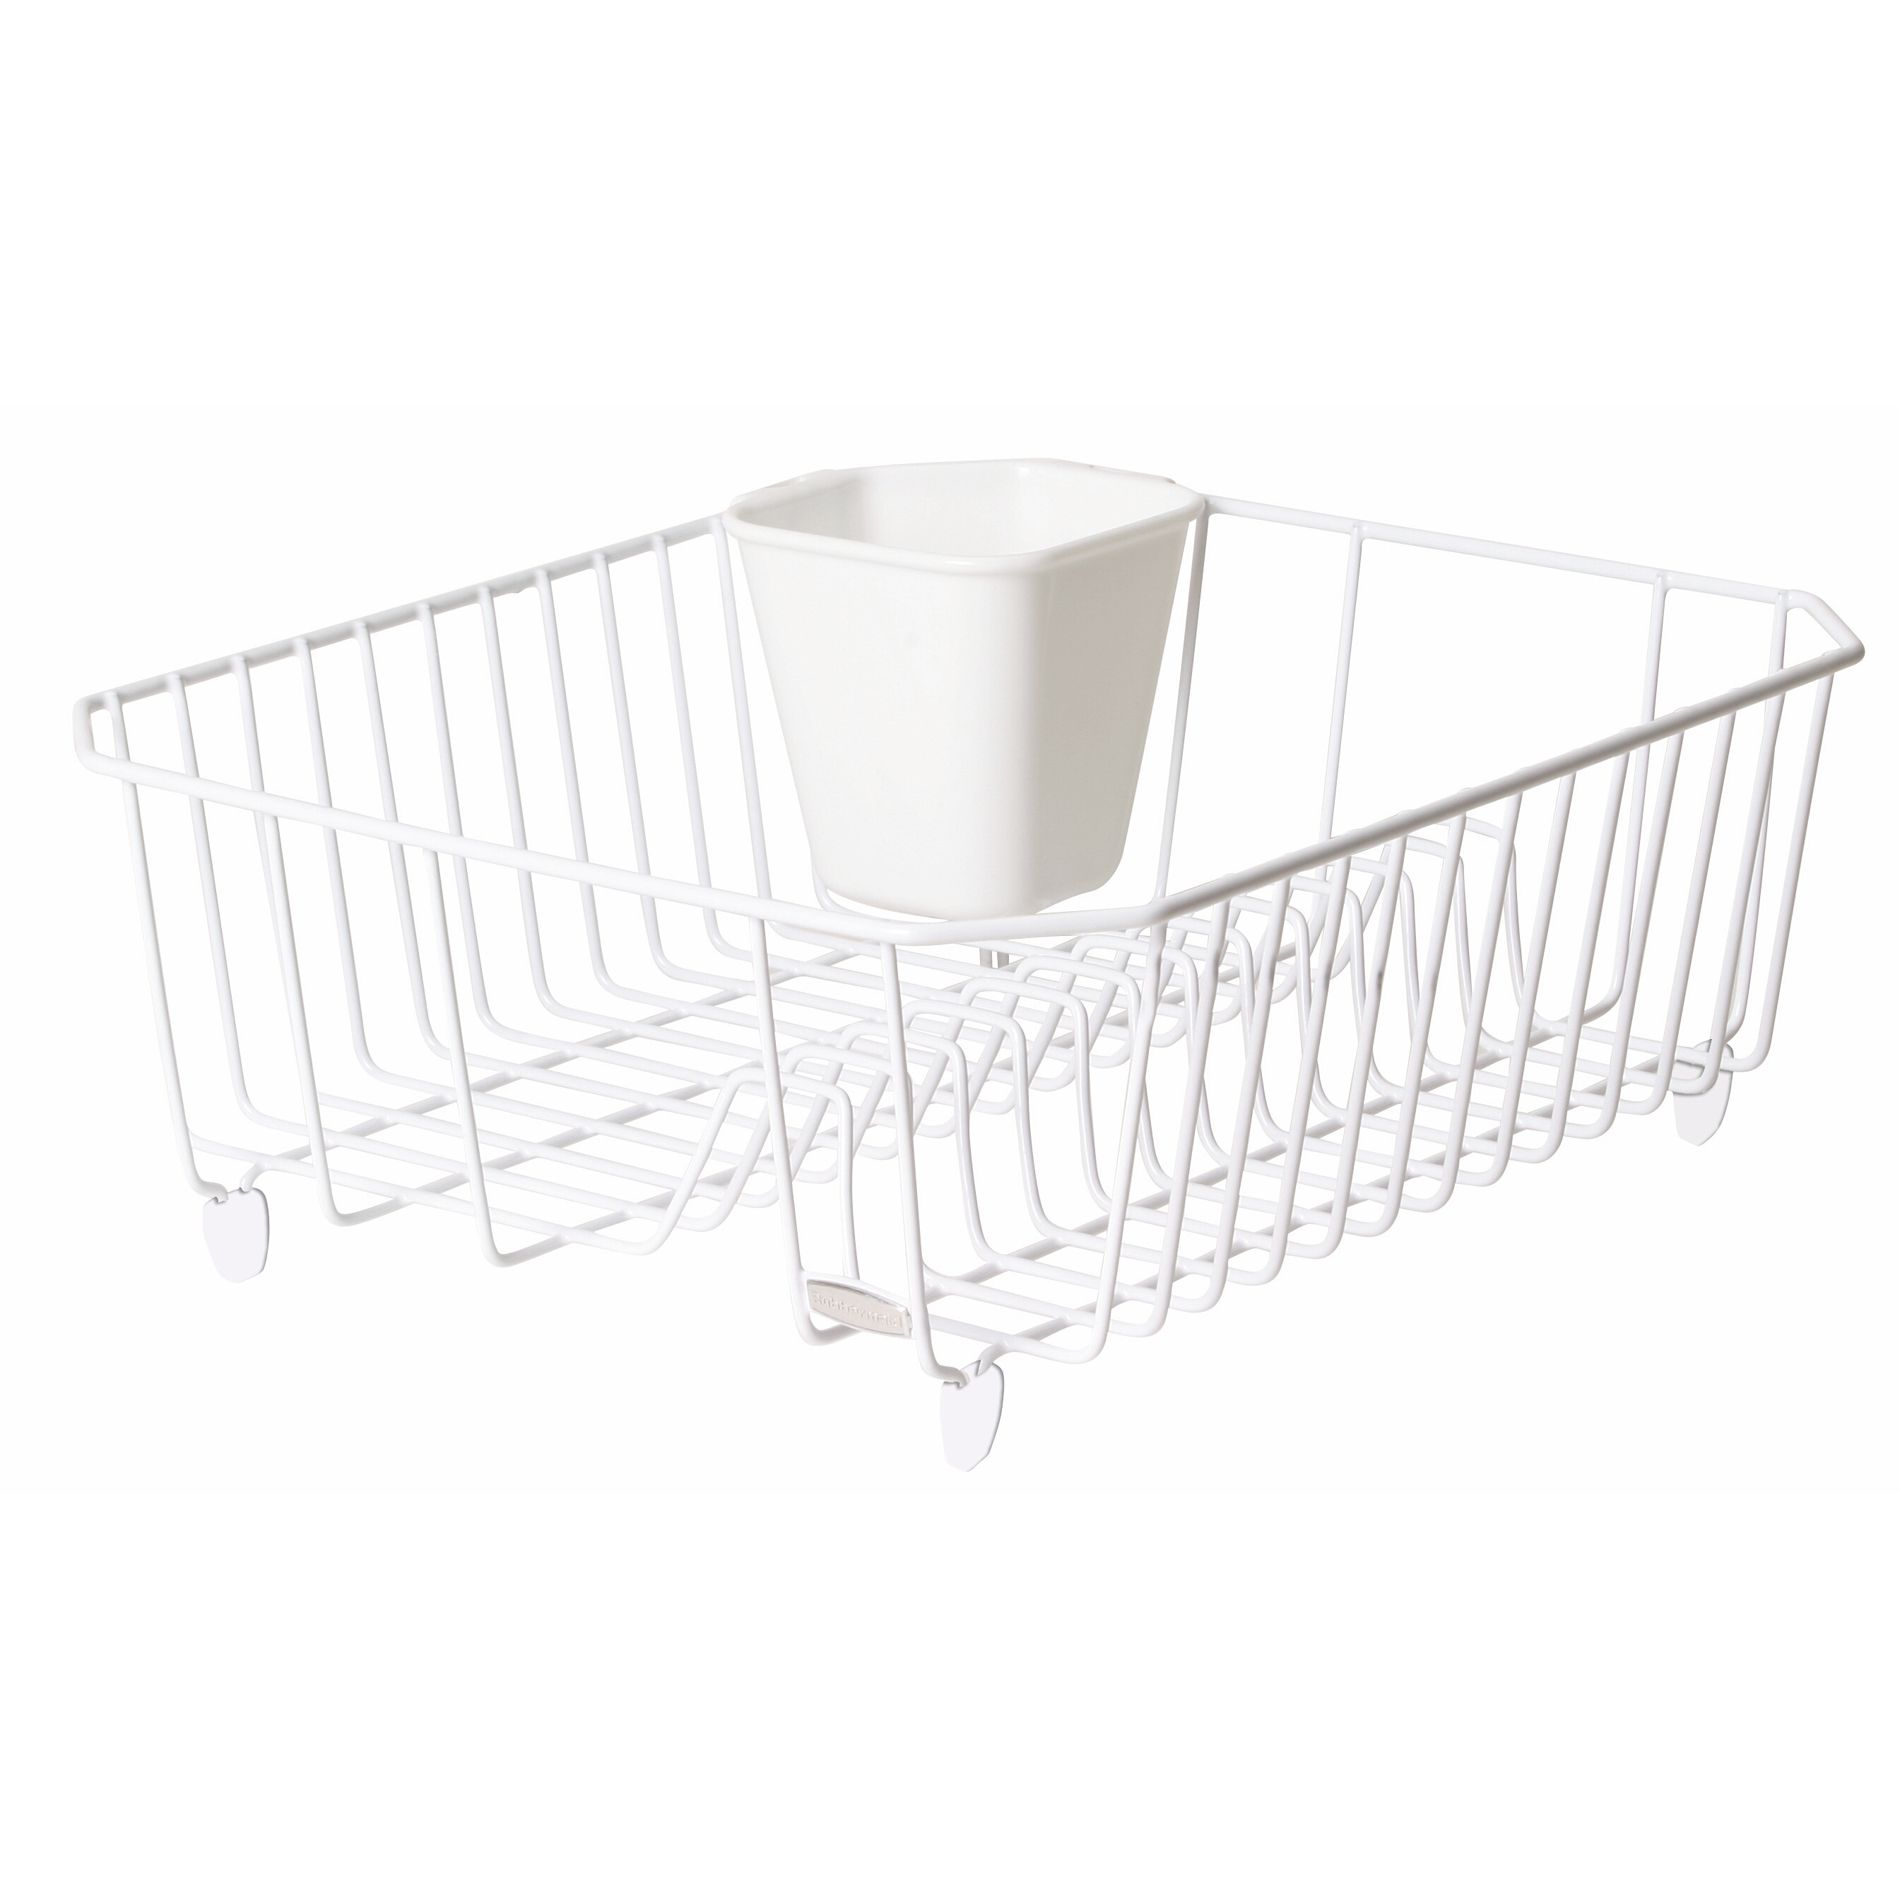 Rubbermaid Large White Dish Drainer